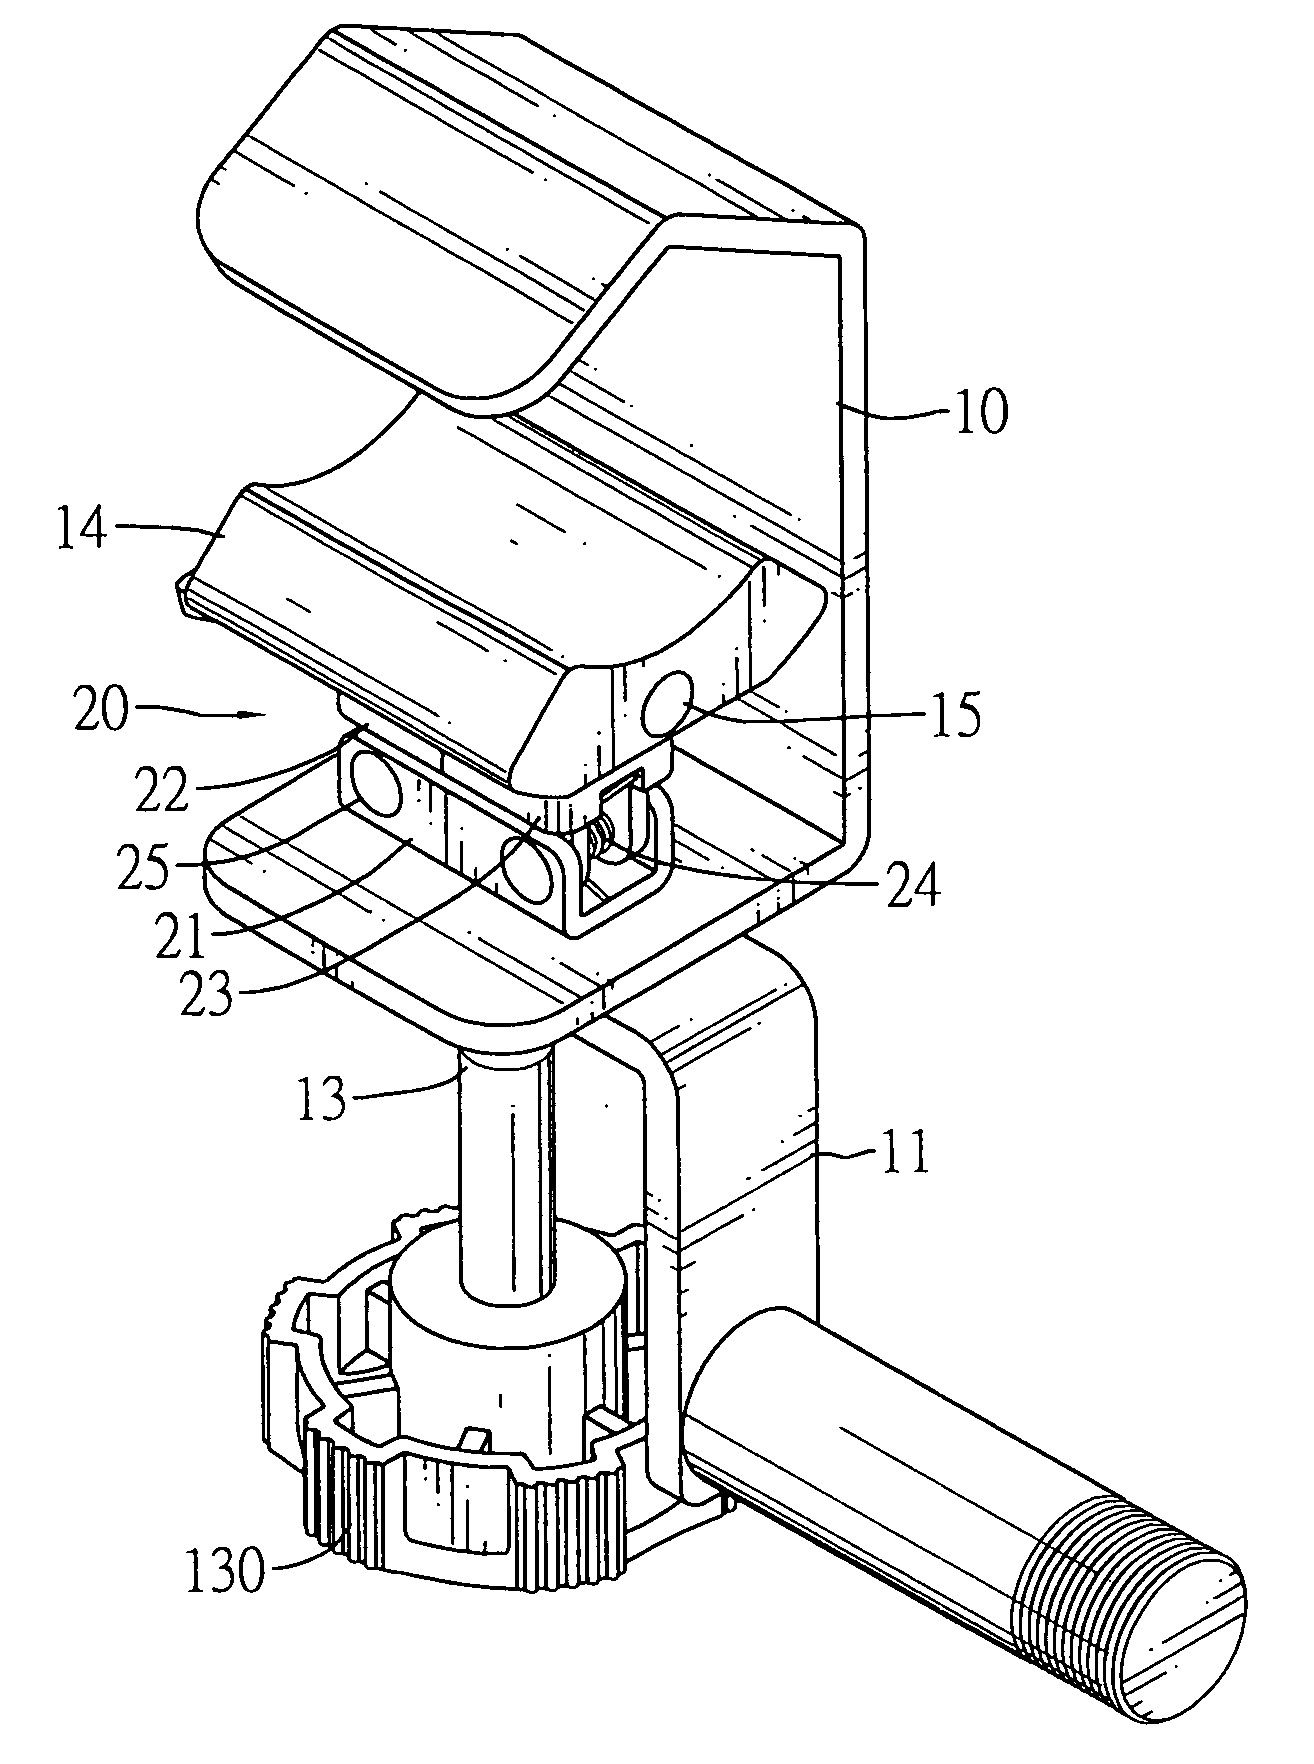 Fast-acting clamp for a musical instrument